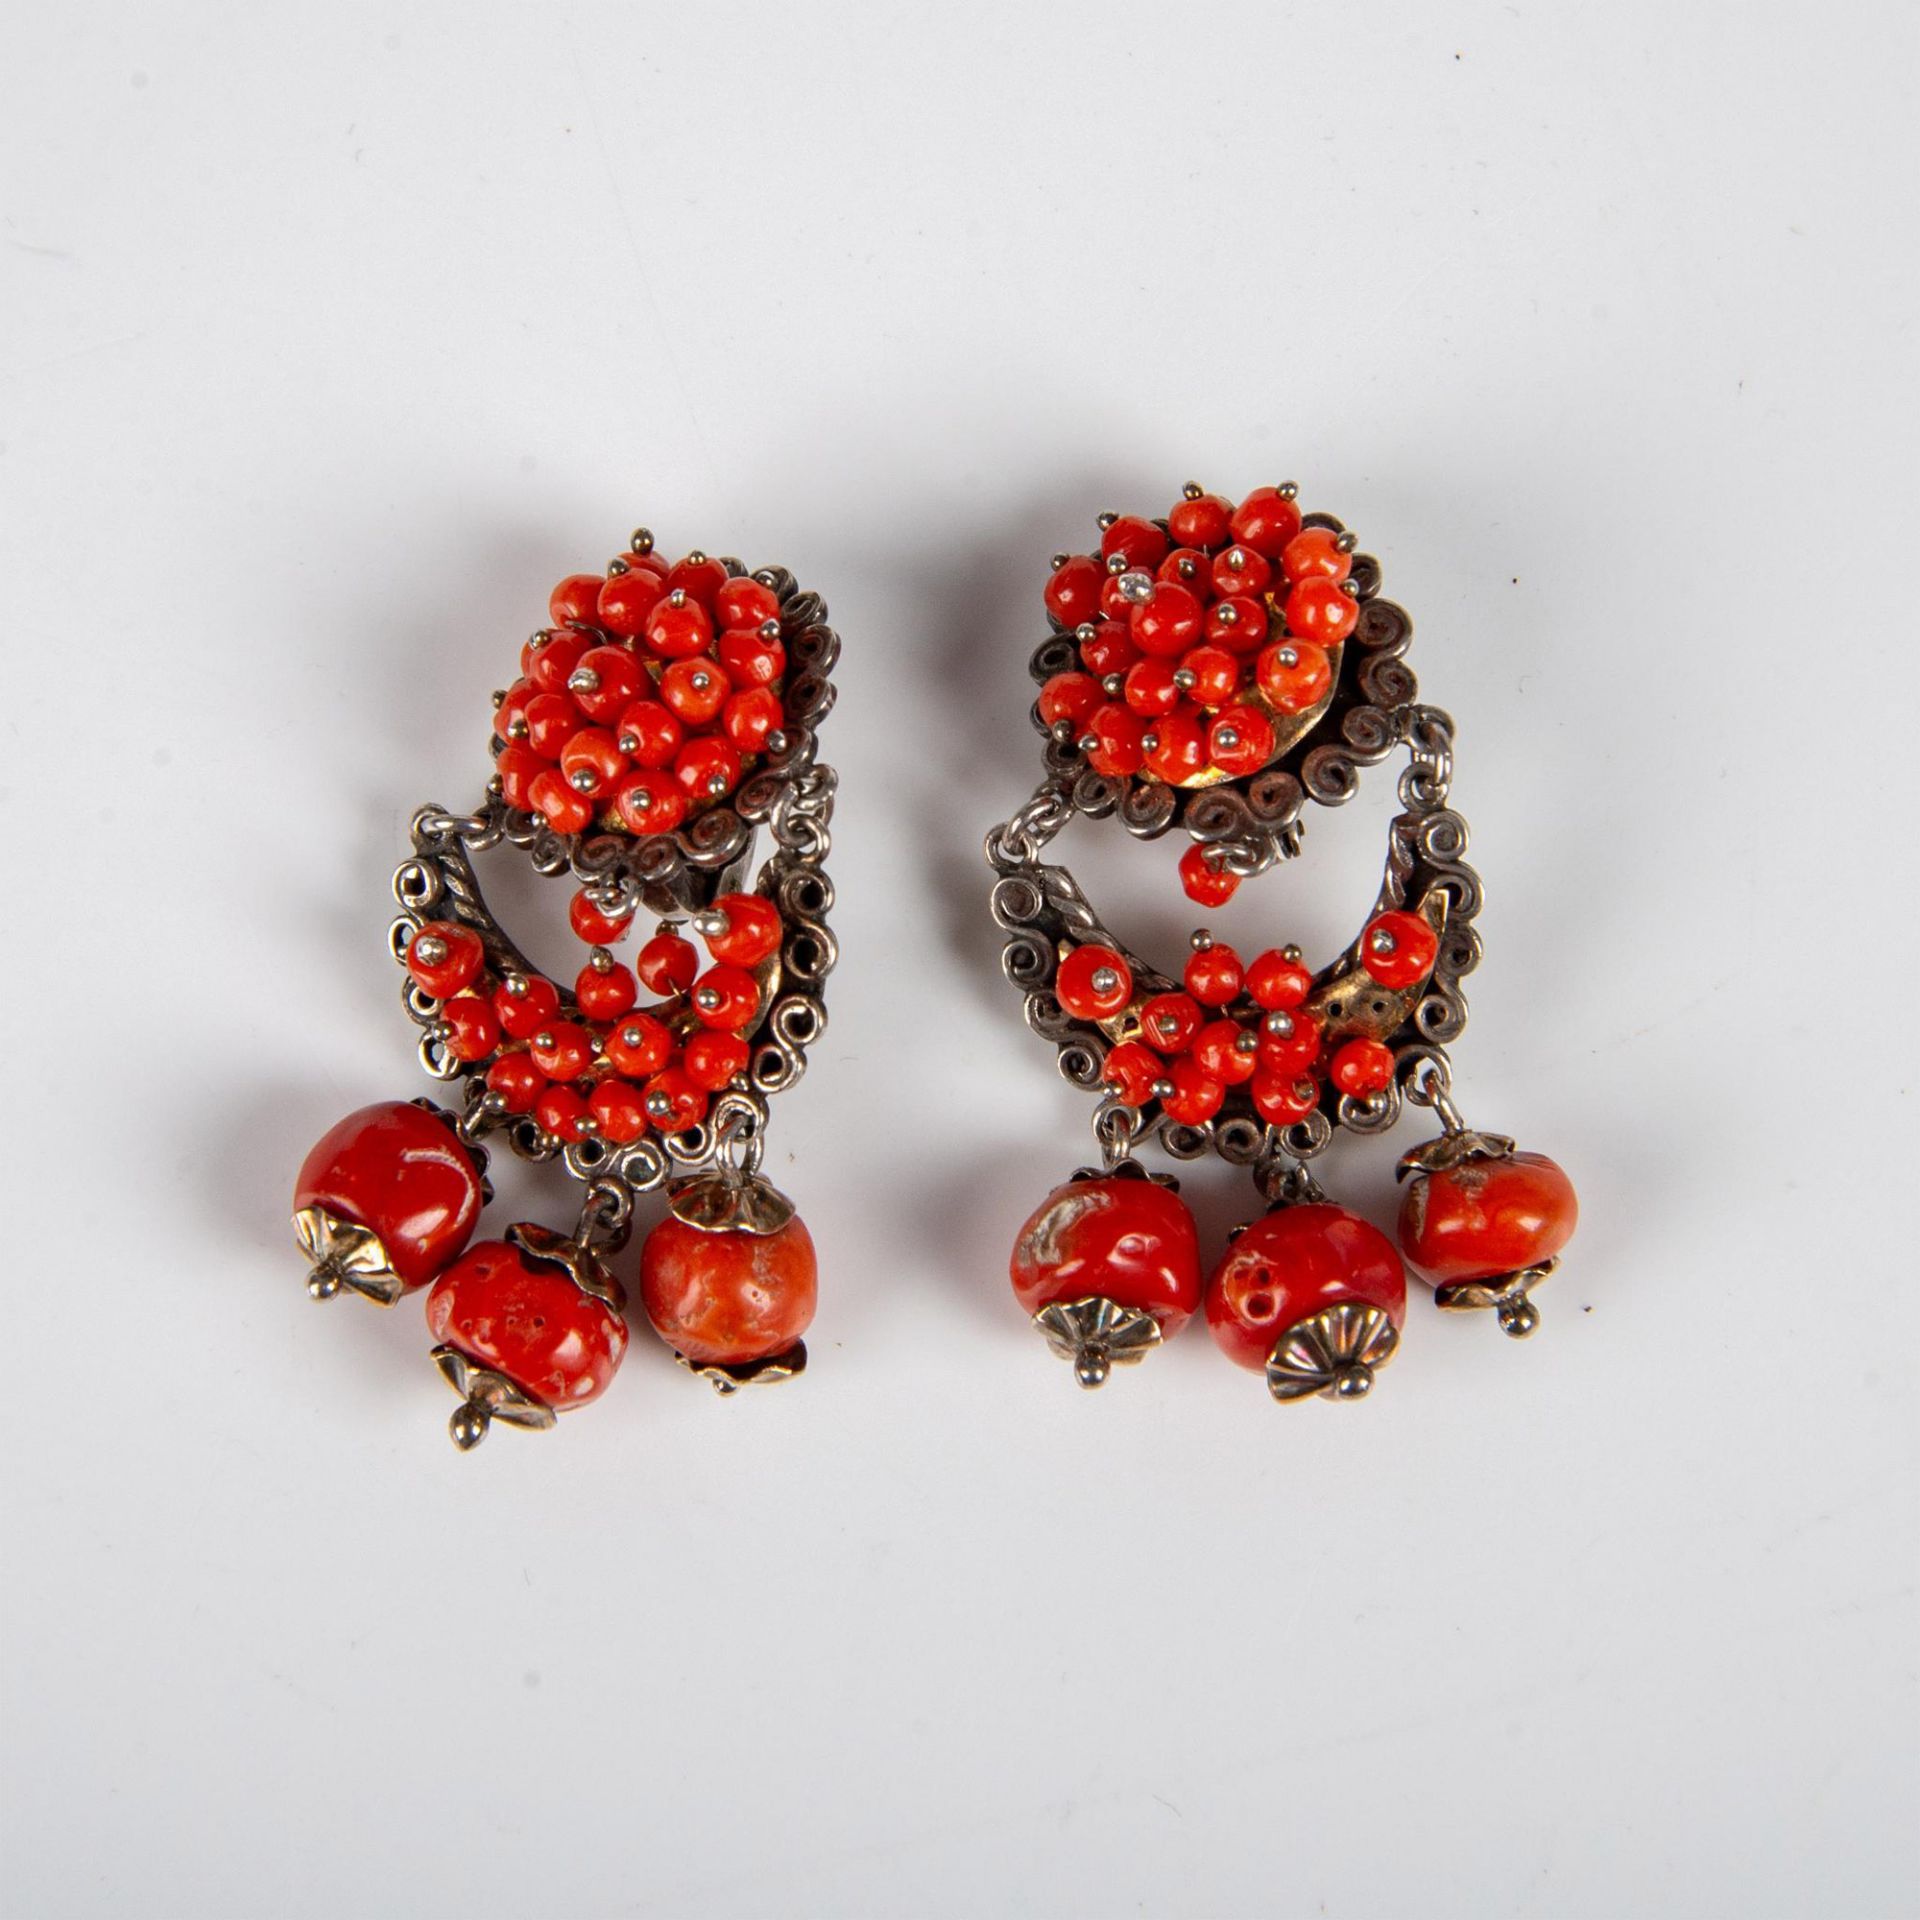 Pair of Silver and Chinese Coral Earrings - Image 3 of 6